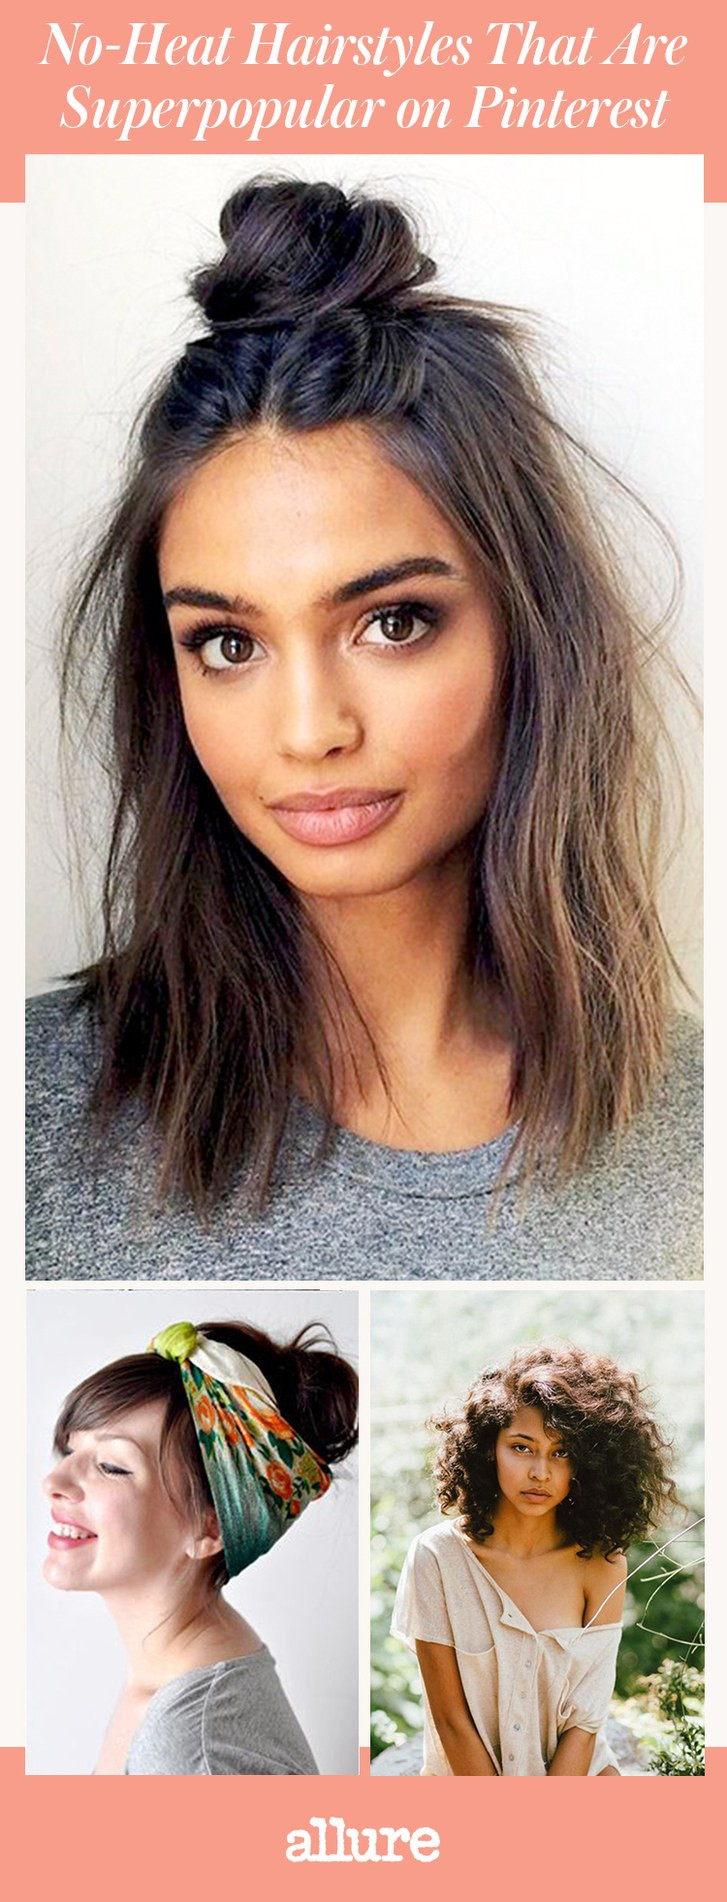 Pinterest Hairstyles For Short Hair
 No Heat Hairstyles That Are Superpopular on Pinterest